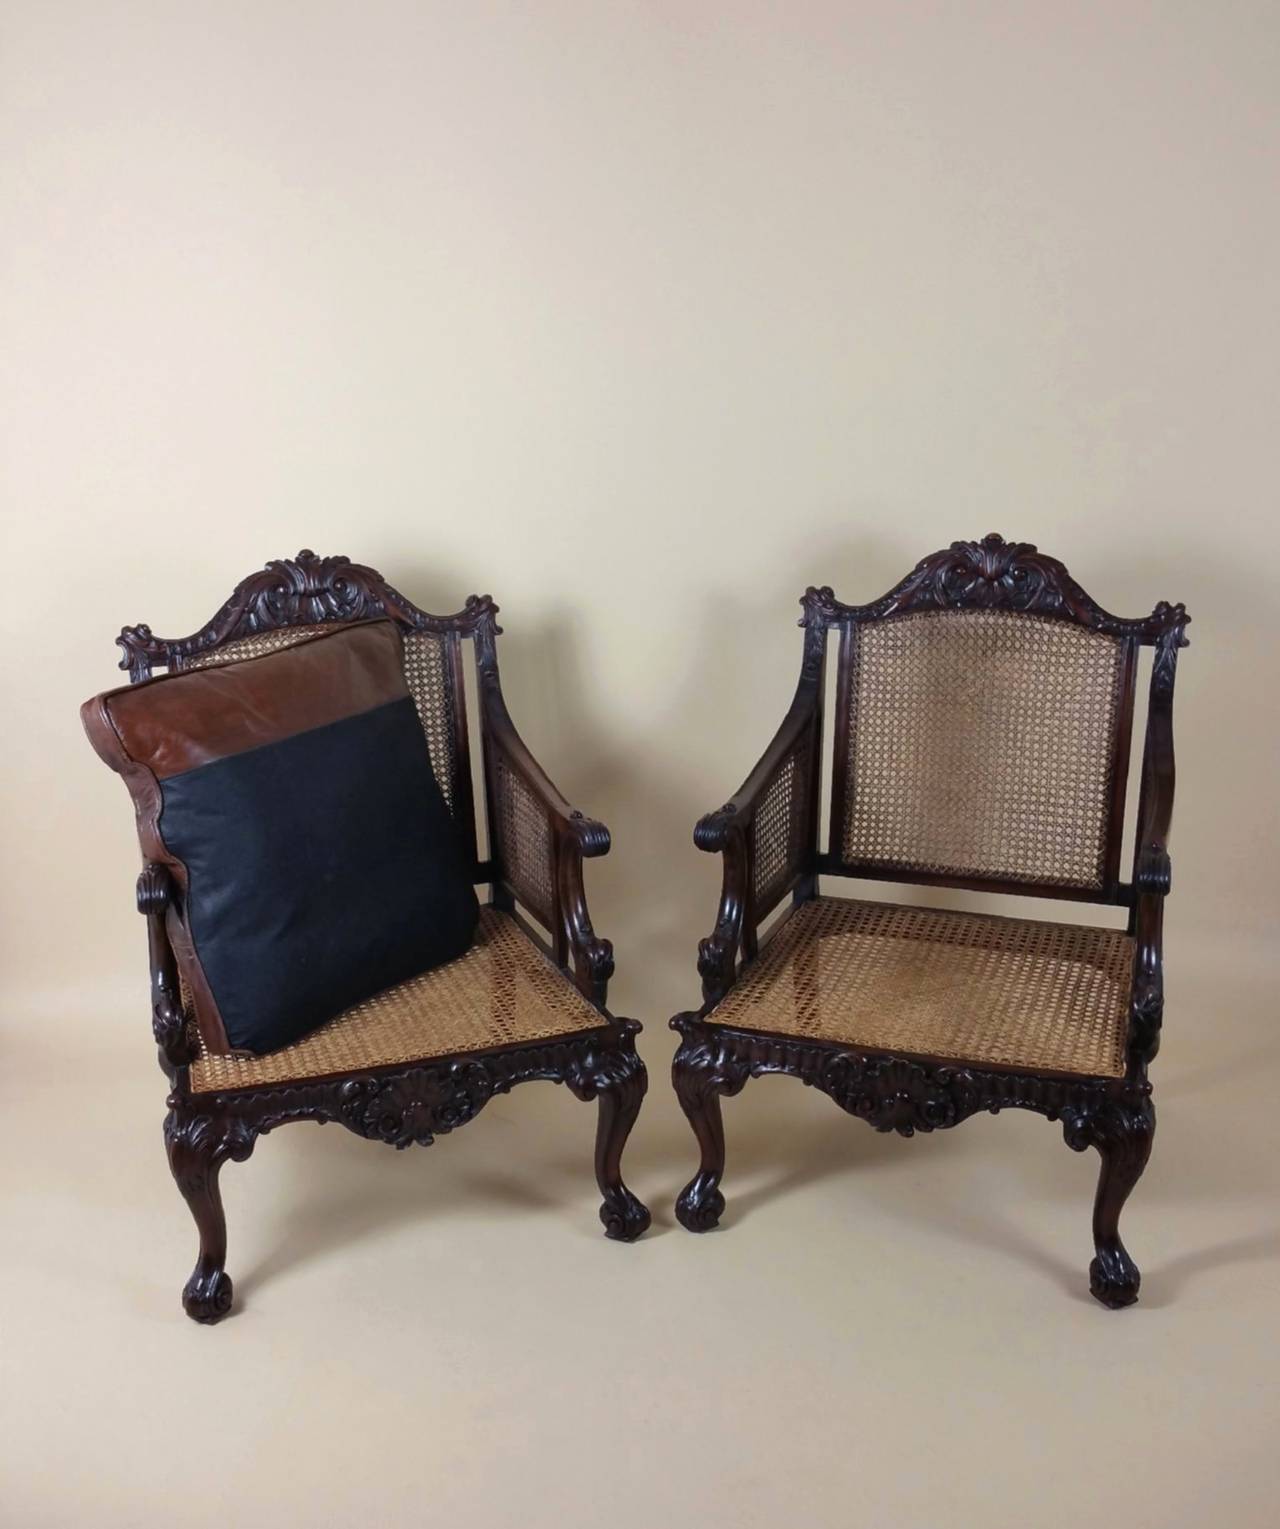 A superb quality pair of Georgian style carved mahogany library chairs with shaped and fitted separate leather seat cushions. The chairs feature a cane seat and back with ornate carvings of C- scrolls and shells on cabriole front and swept back